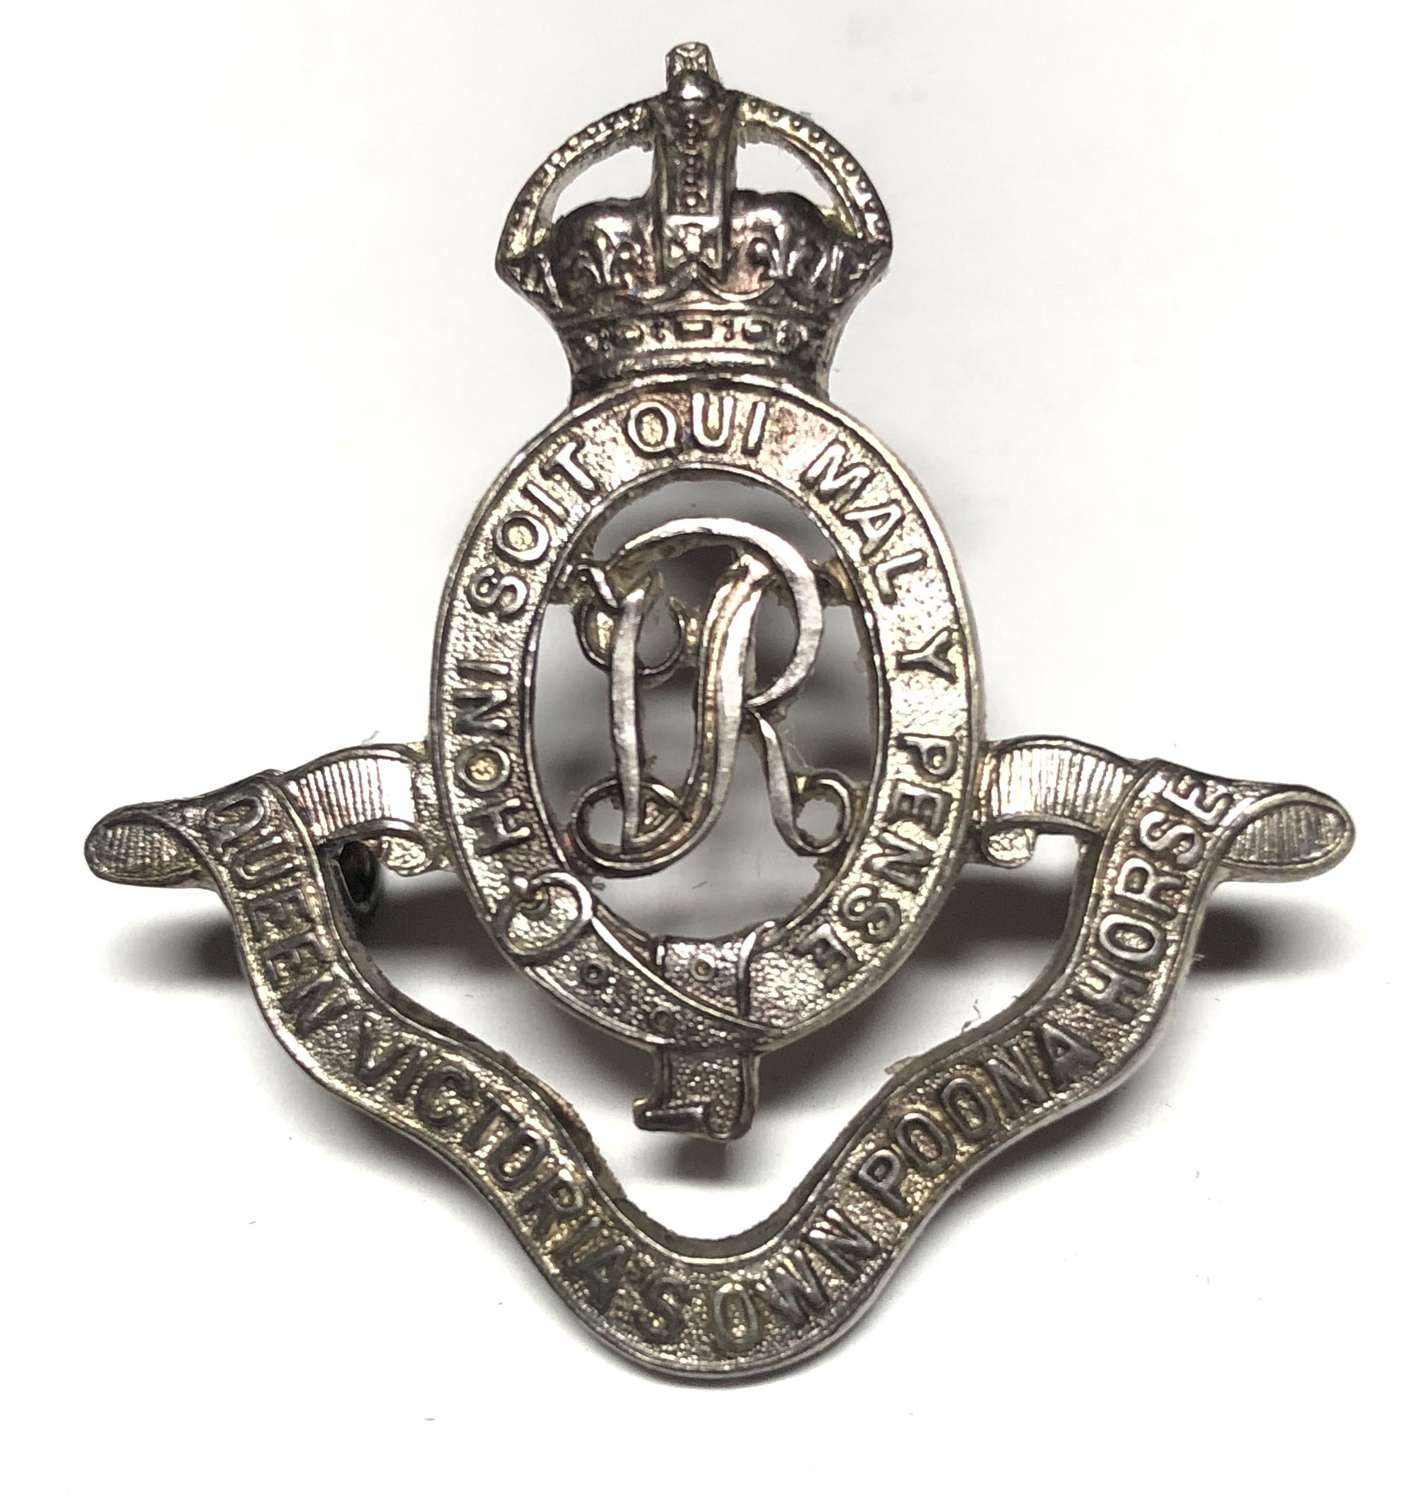 Indian Army. Poona Horse (17th QVO Cavalry) Officer’s cap badge